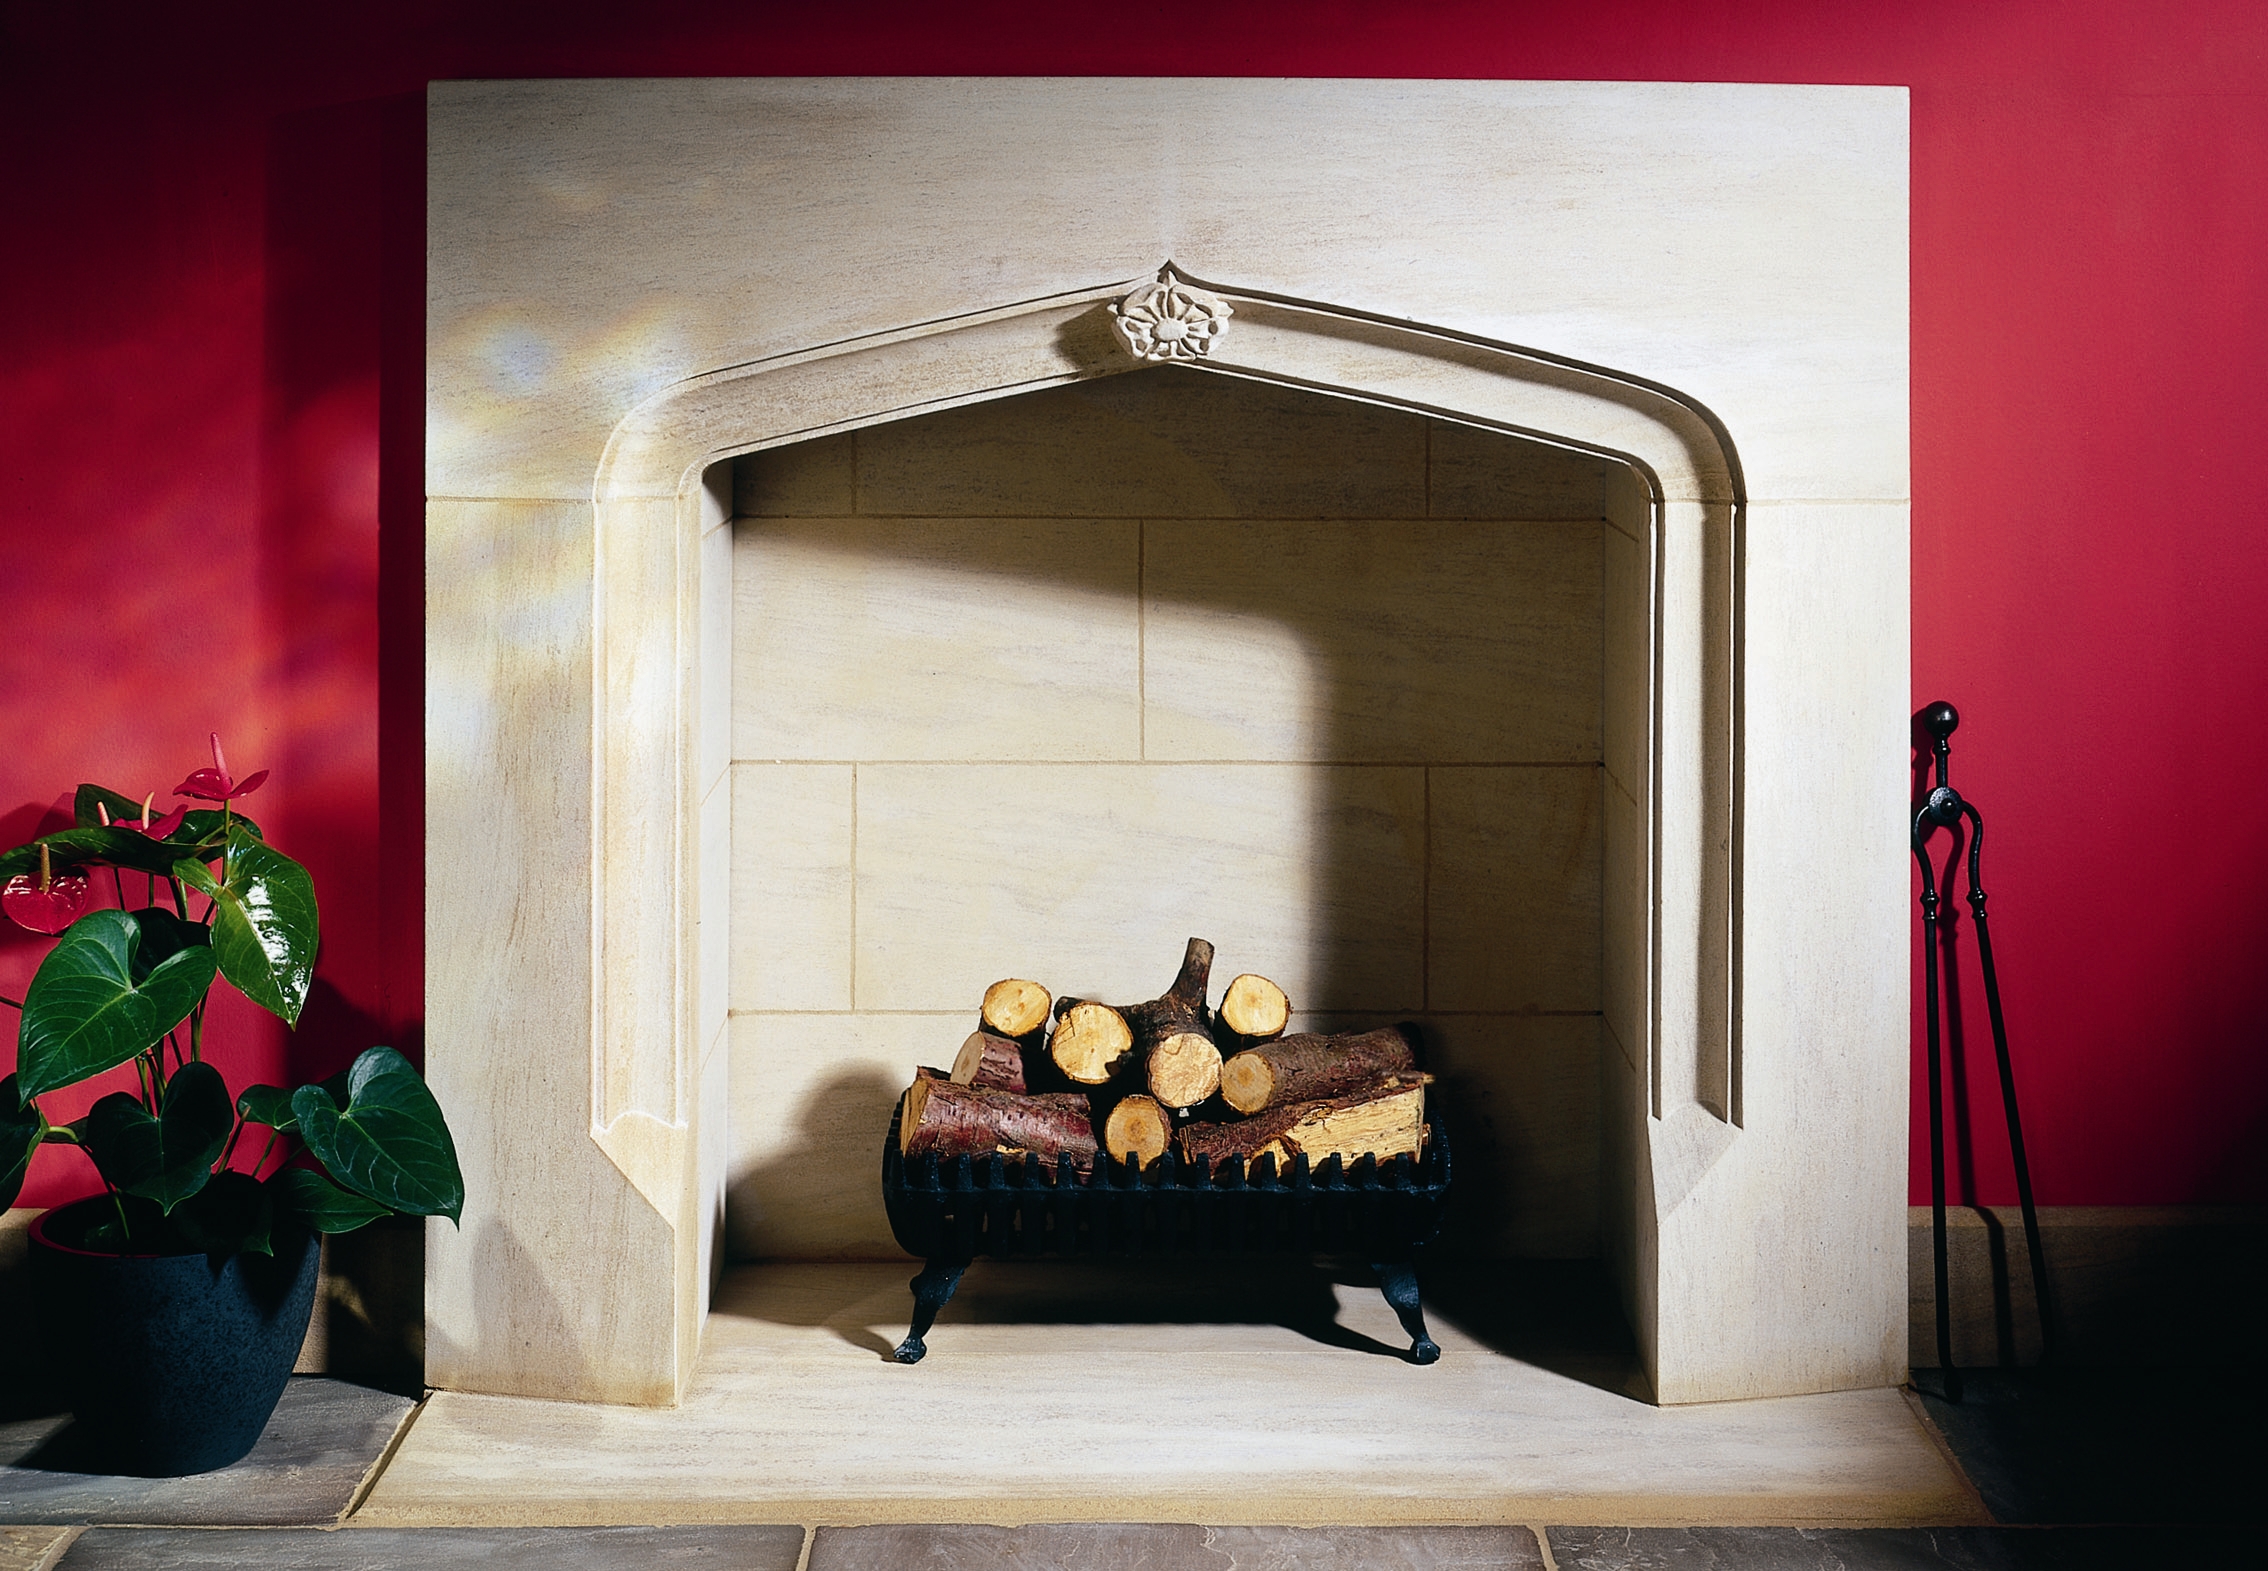 16. A modern interpretation of a Gothic fireplace in Ancaster Hard White stone, with carved rose detail – Derbyshire